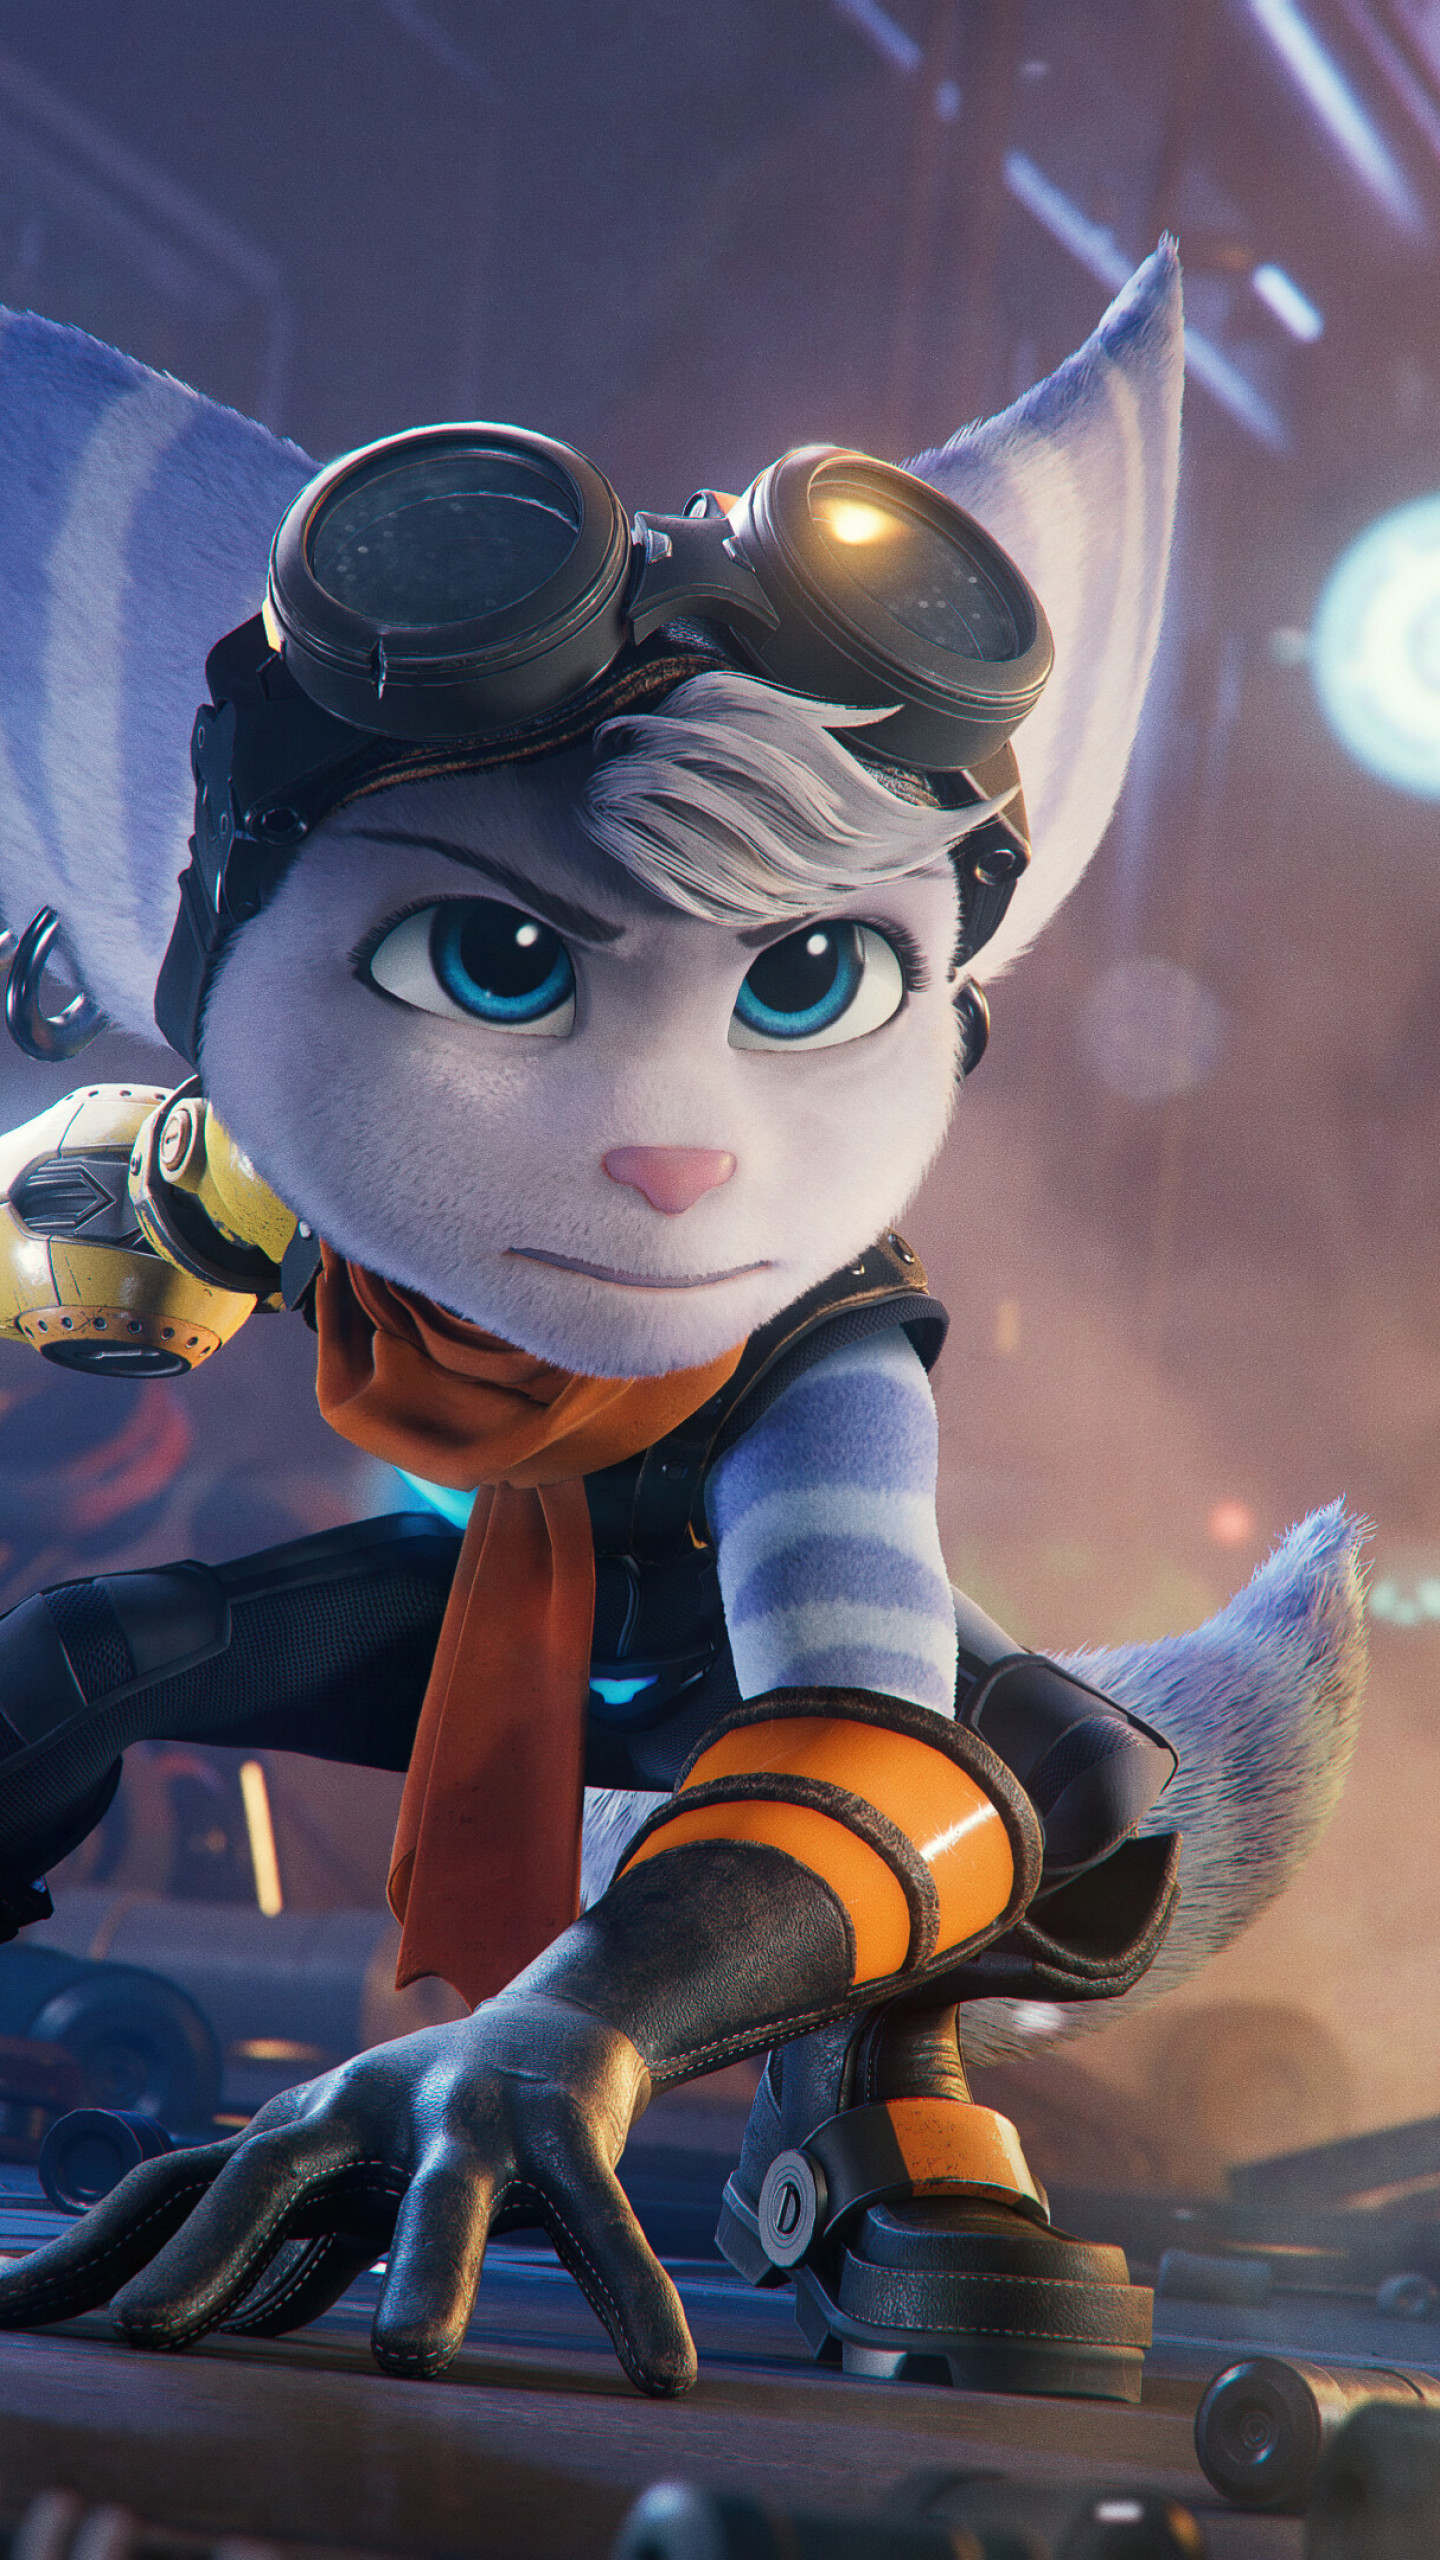 Wallpaper Ratchet & Clank: Rift Apart, gameplay, PlayStation 5, PS5, Games #22607